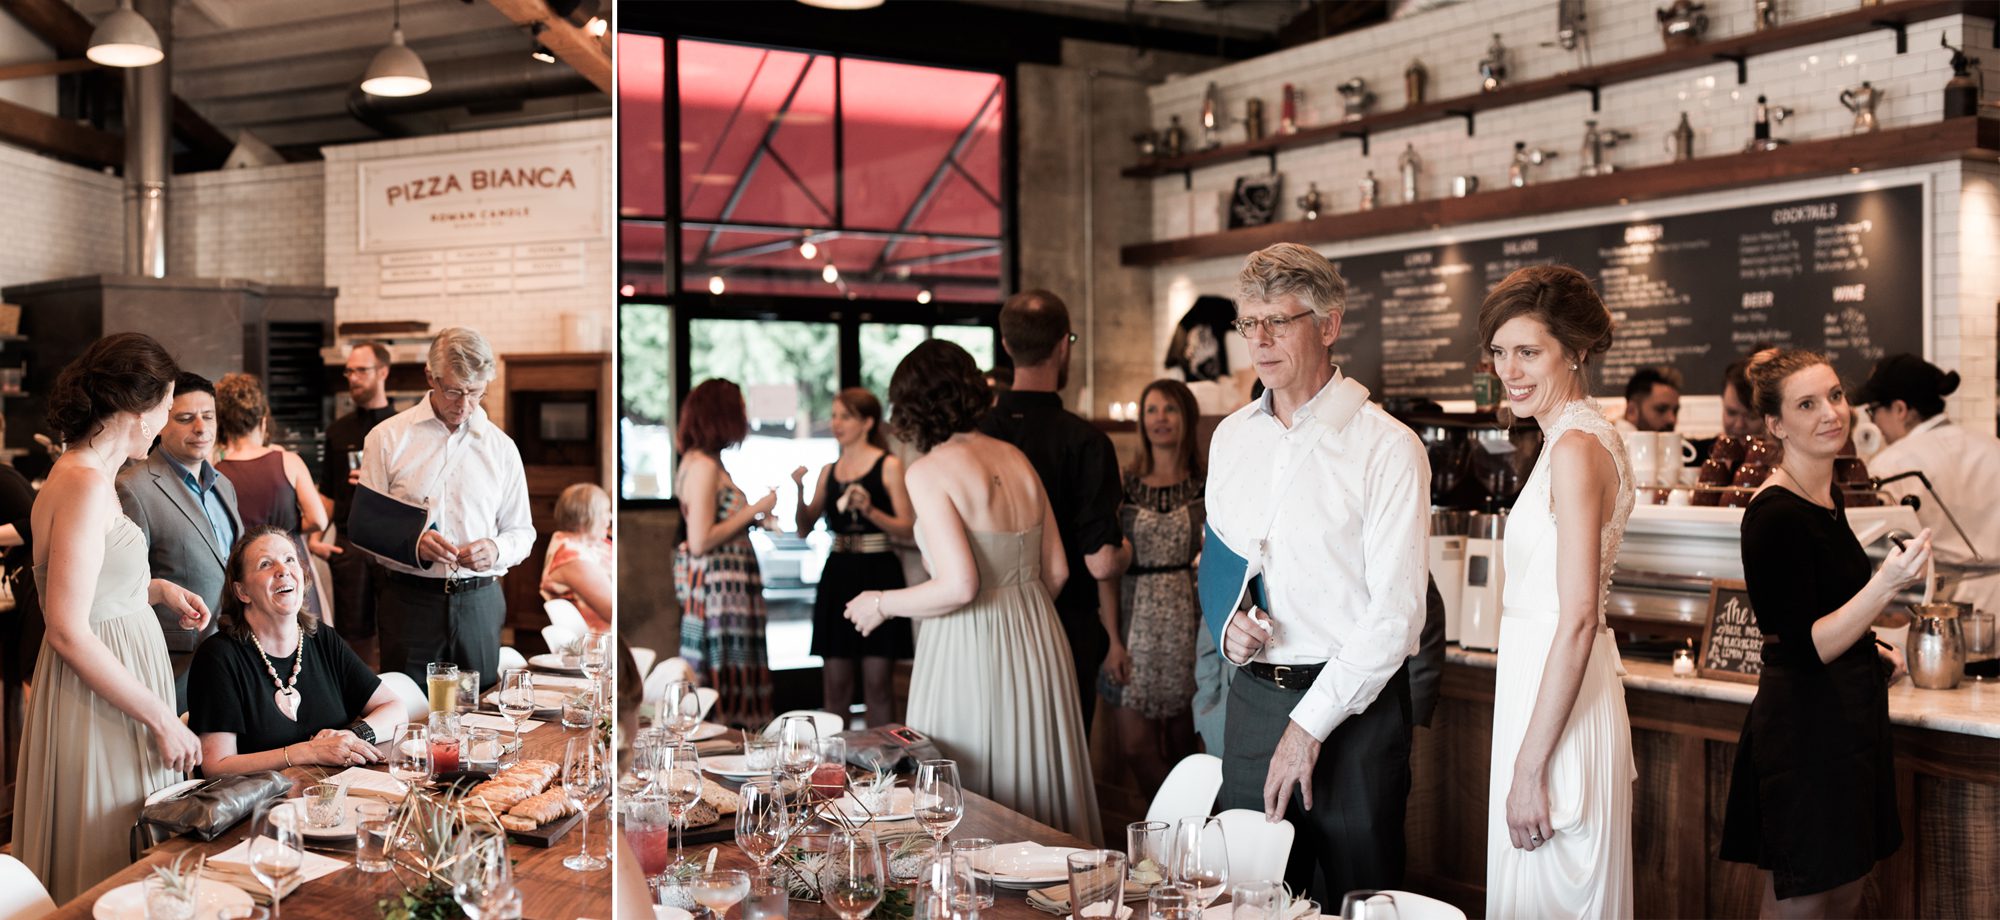 Wedding guests enjoy themselves at a Roman Candle Baking Co reception. By wedding photographer Briana Morrison